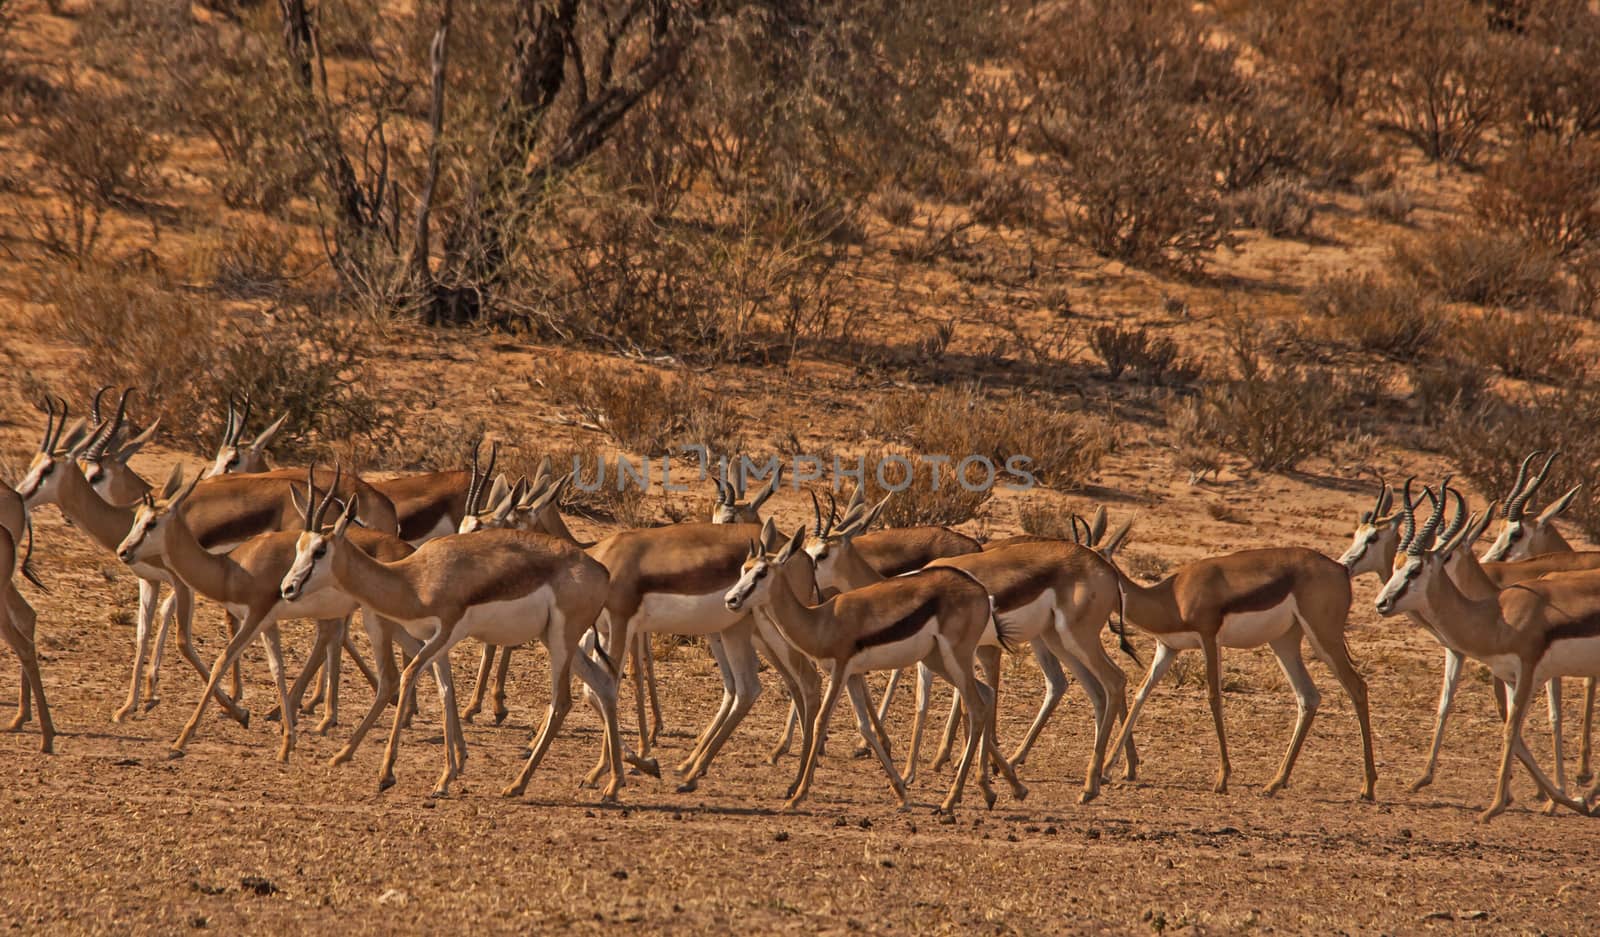 A herd of springbok on their way to the water hole, photographed in Kgalagadi Trans frontier Park, South Africa.